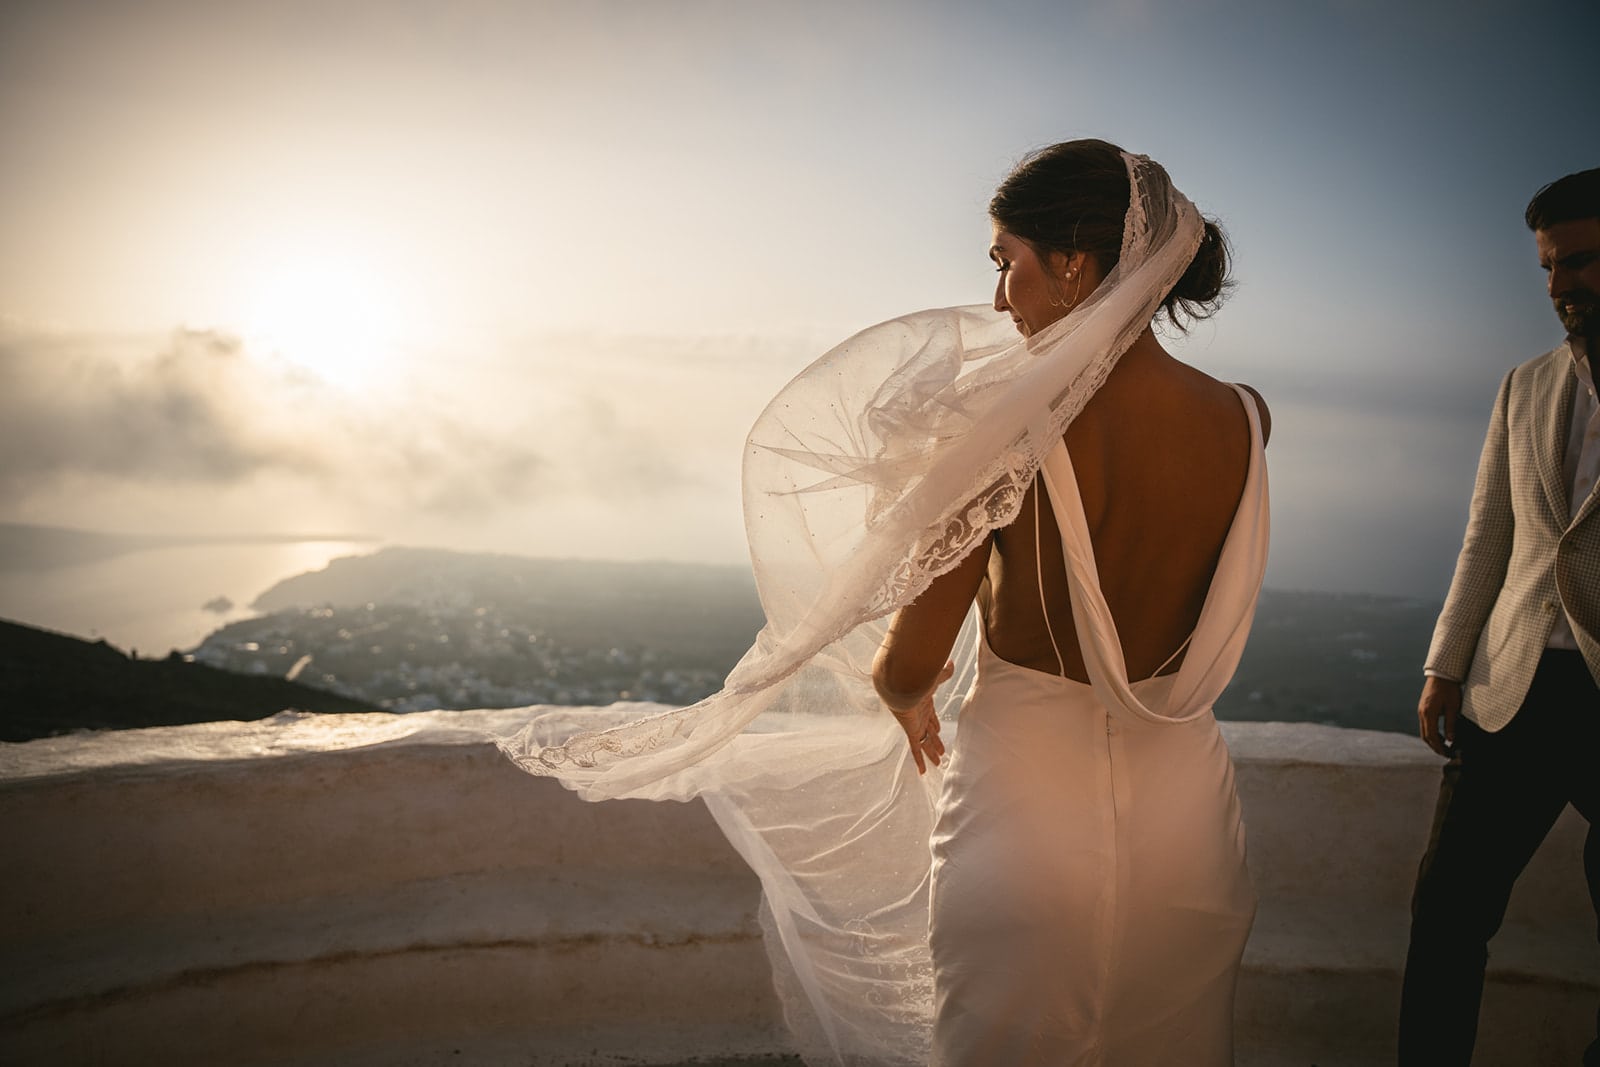 Their walk to the ceremony, a symbolic passage through Santorini’s beauty, into union